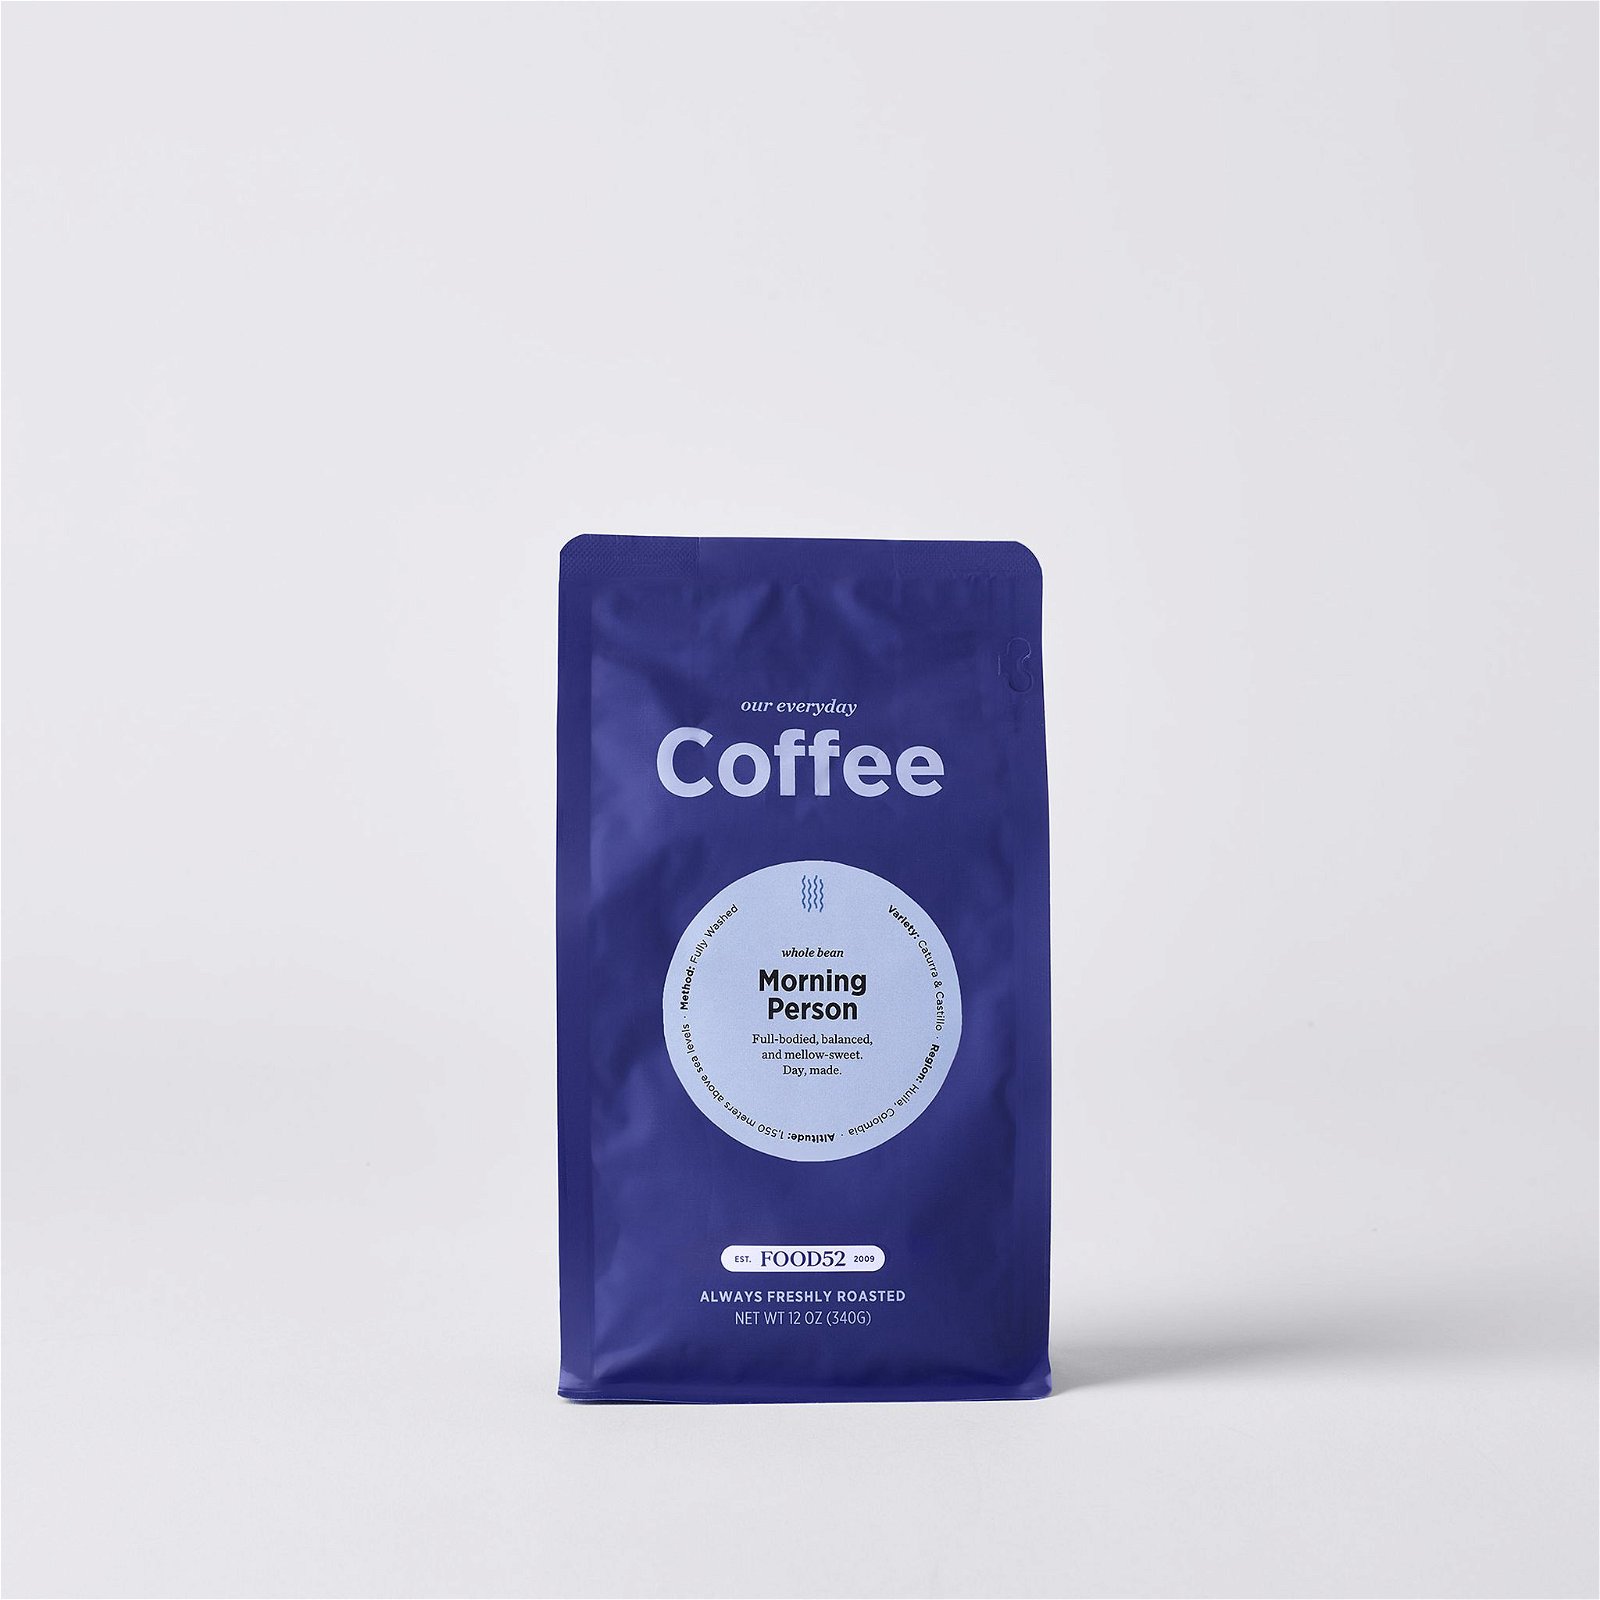 Food52 Morning Person Drip Coffee Blend, Whole Beans, 12 oz